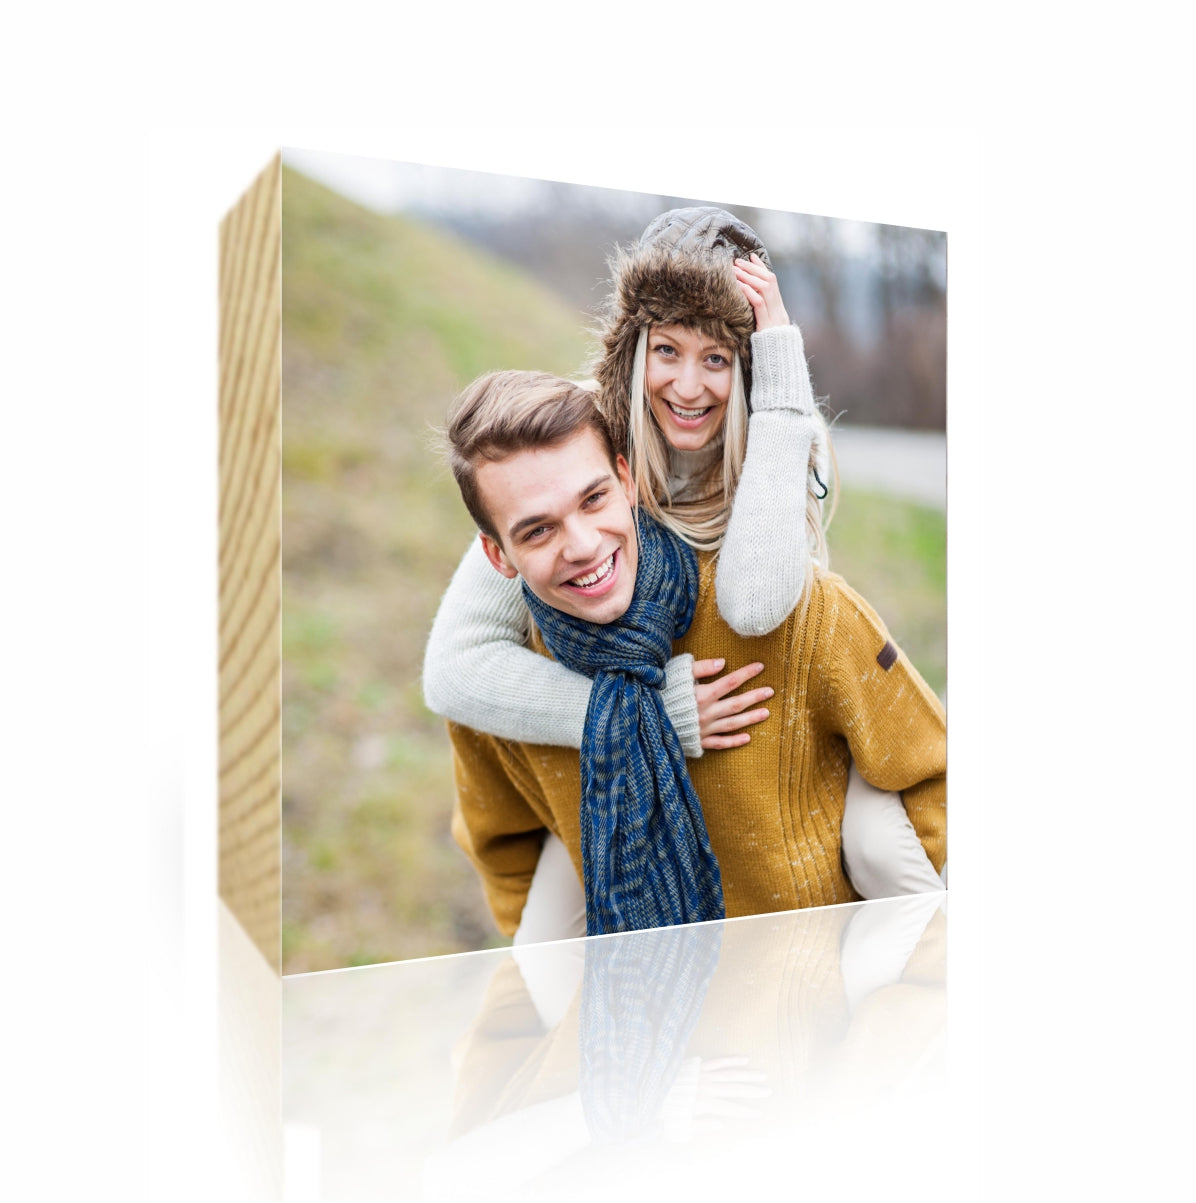 Chunky Wooden Photo Blocks are an ideal gift. These wooden photo blocks have a beautiful glossy finish. No need to worry about hanging to a wall, these sit beautifully on any surface